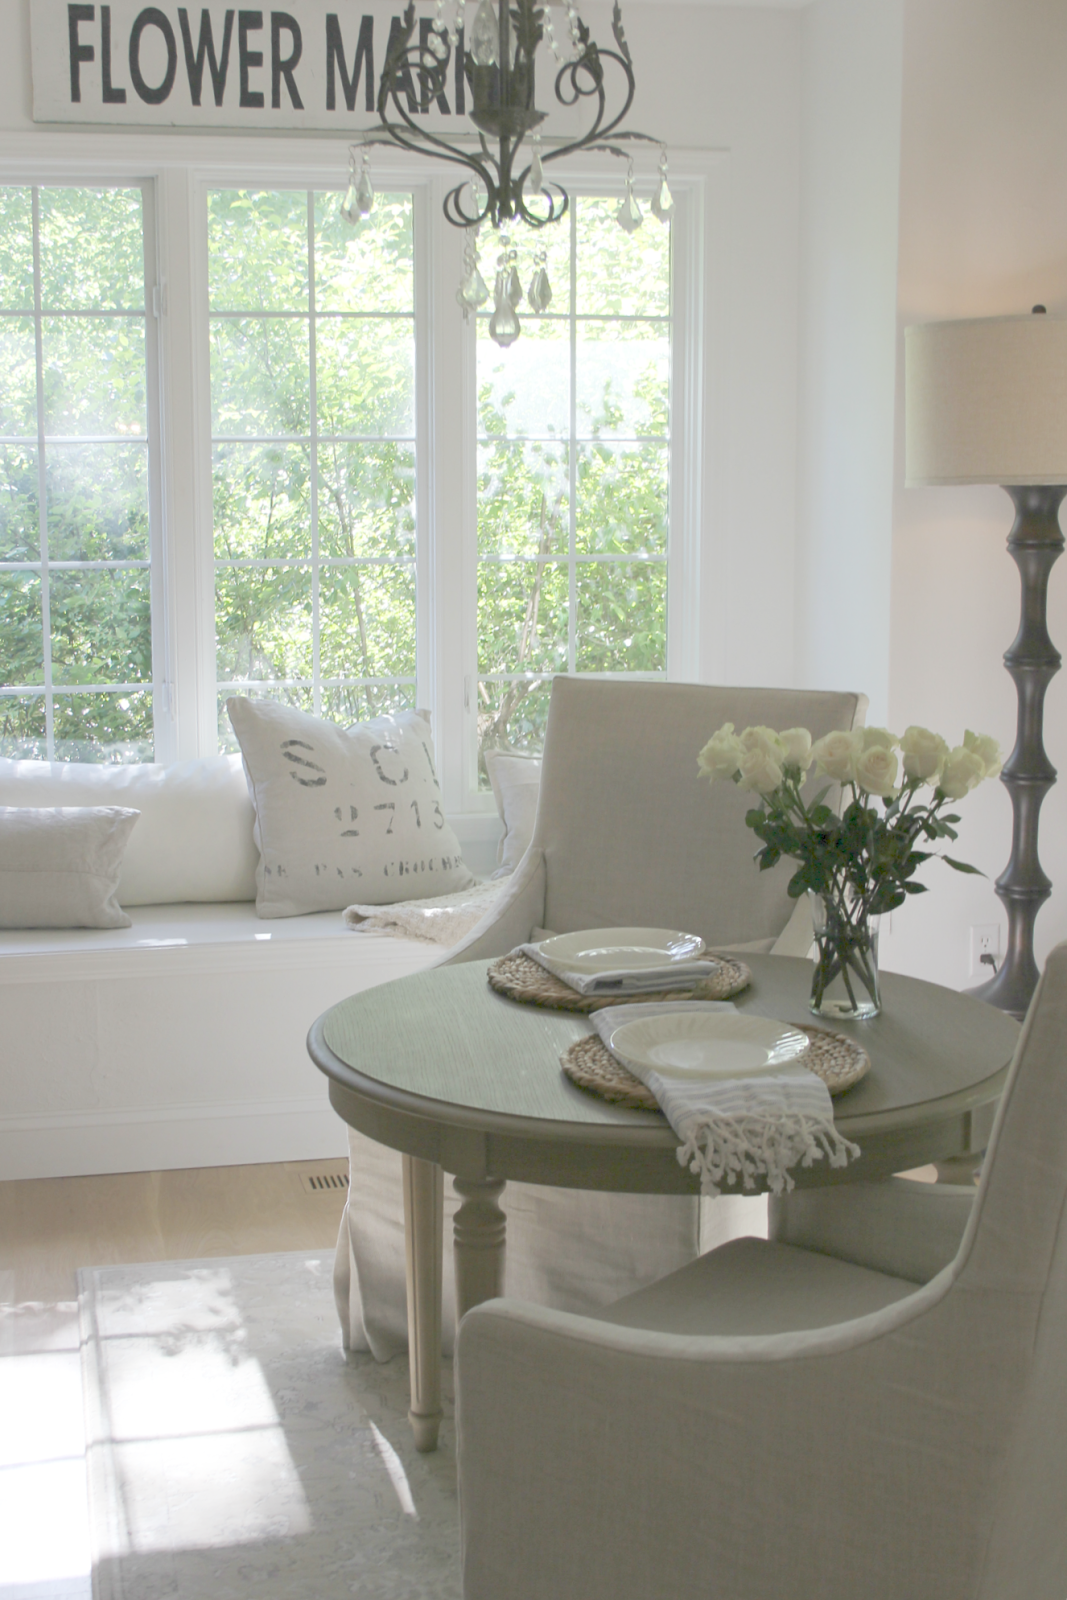 Serene breakfast room with window seat, round dining table, Belgian linen slipcovered arm chairs, and vintage Flower Market sign. Best of Late Summer 2019 on Hello Lovely...in case you're in the mood for decor inspiration.